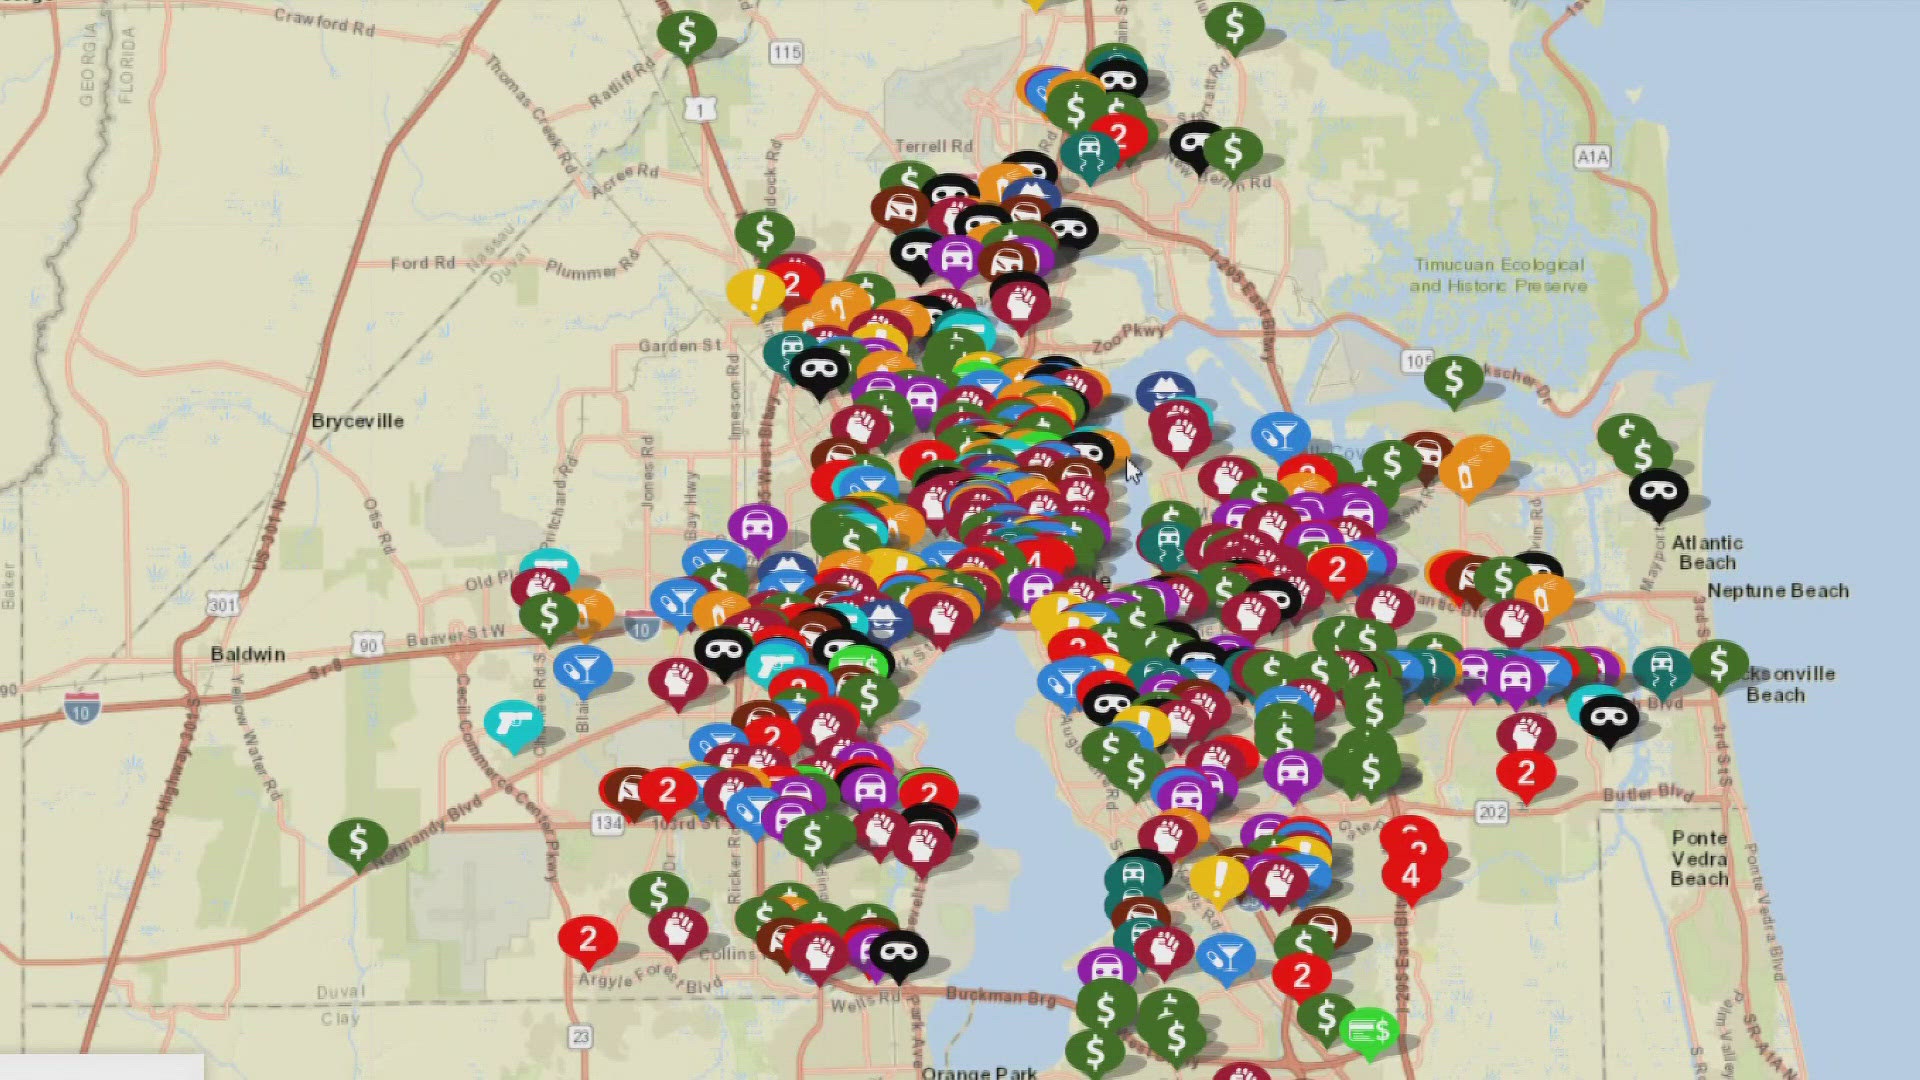 Why is the crime map being updated?